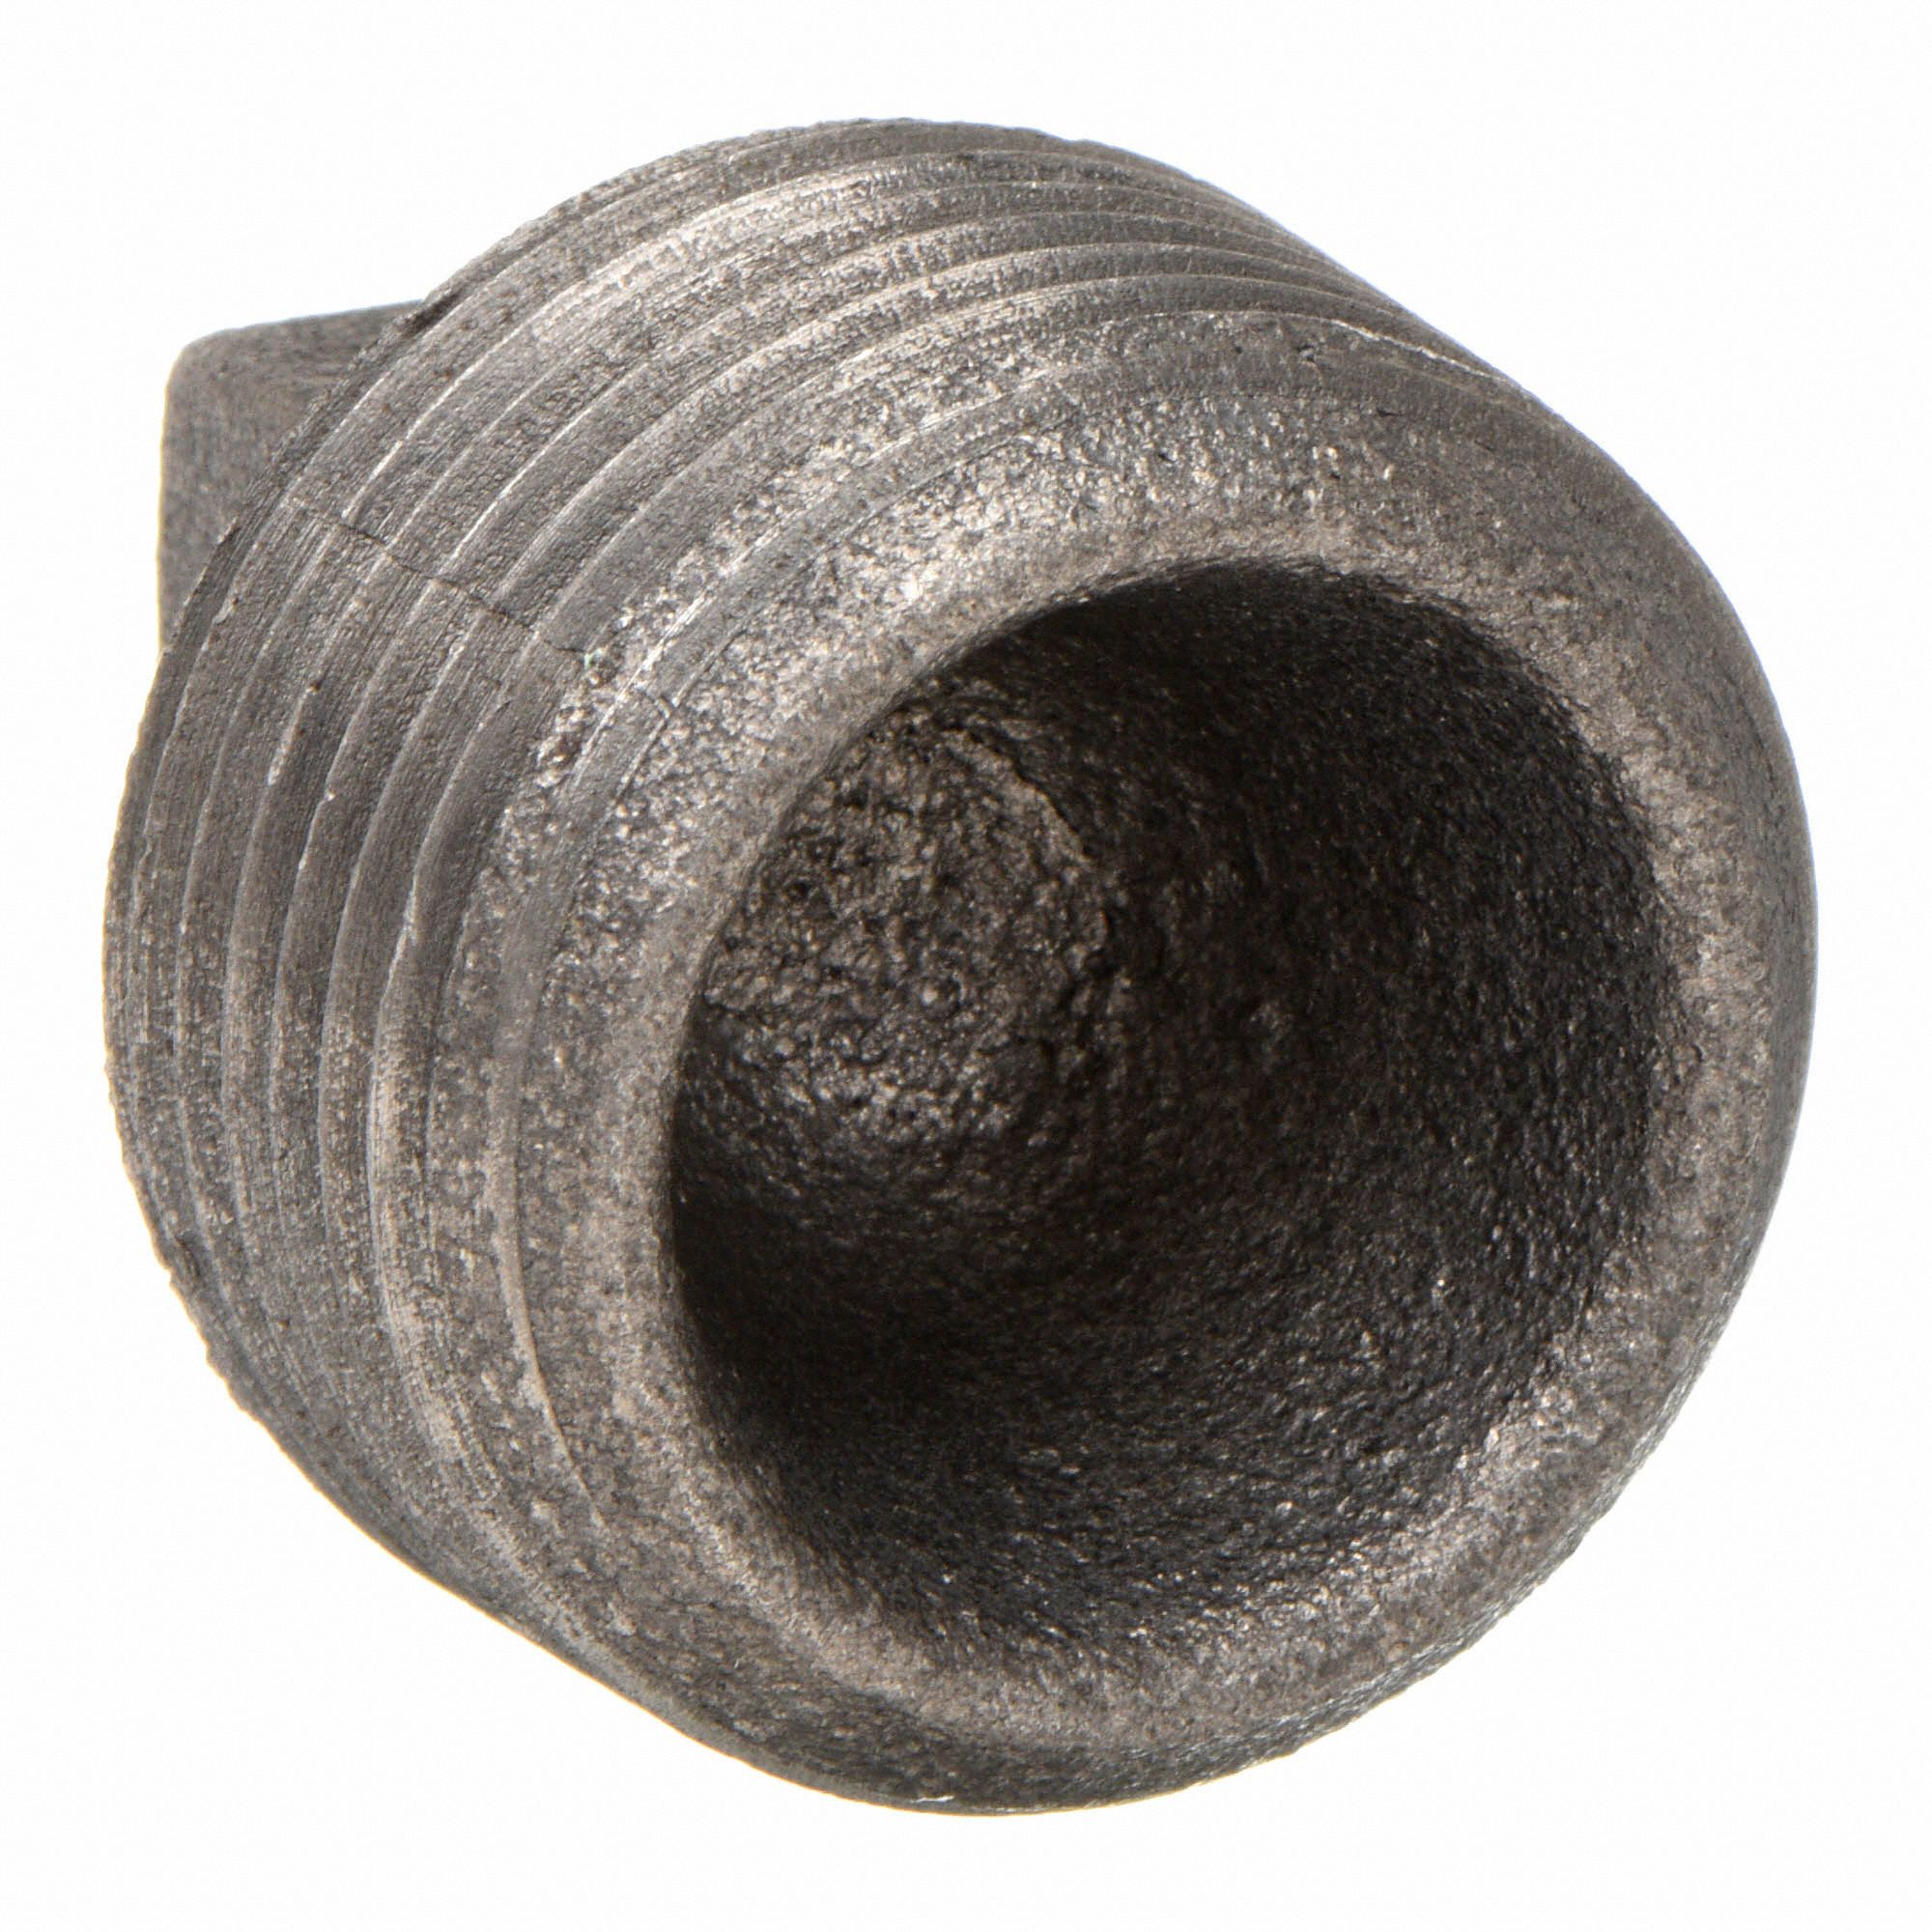 Details about   Everflow Supplies GMPL0340 3/4" Galvanized Malleable Iron Plug with Square Head 